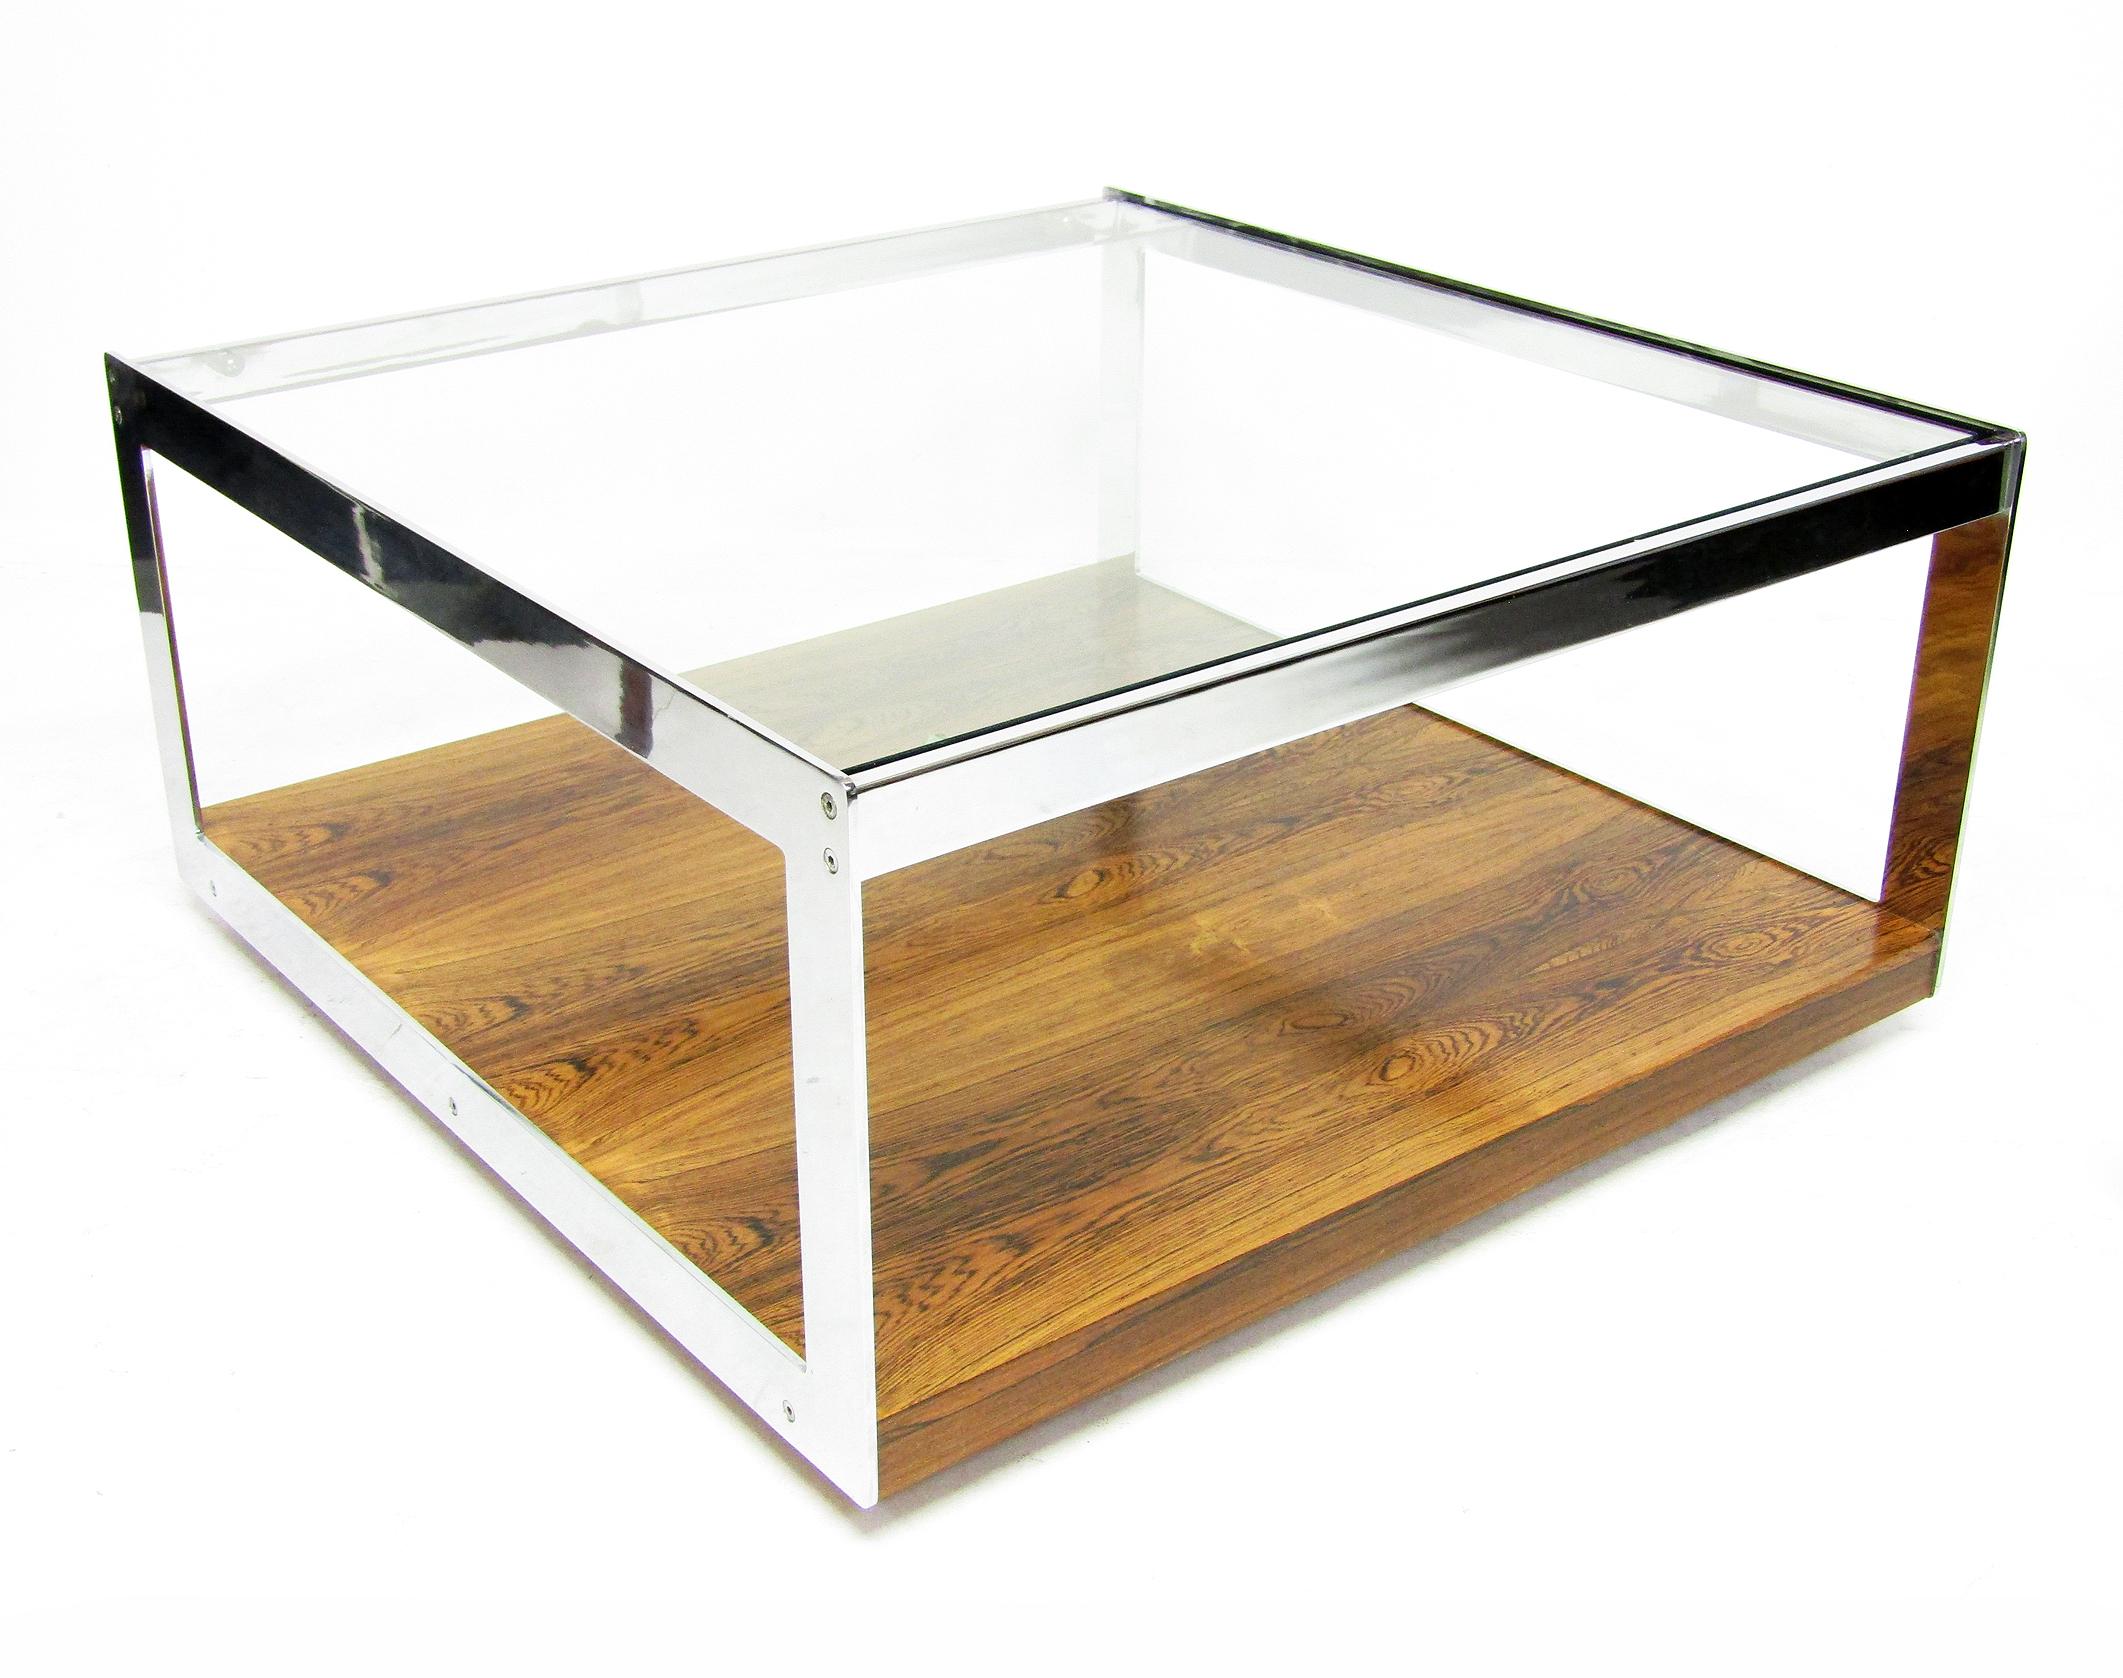 British Large Rosewood & Chrome Coffee Table by Richard Young for Merrow Associates